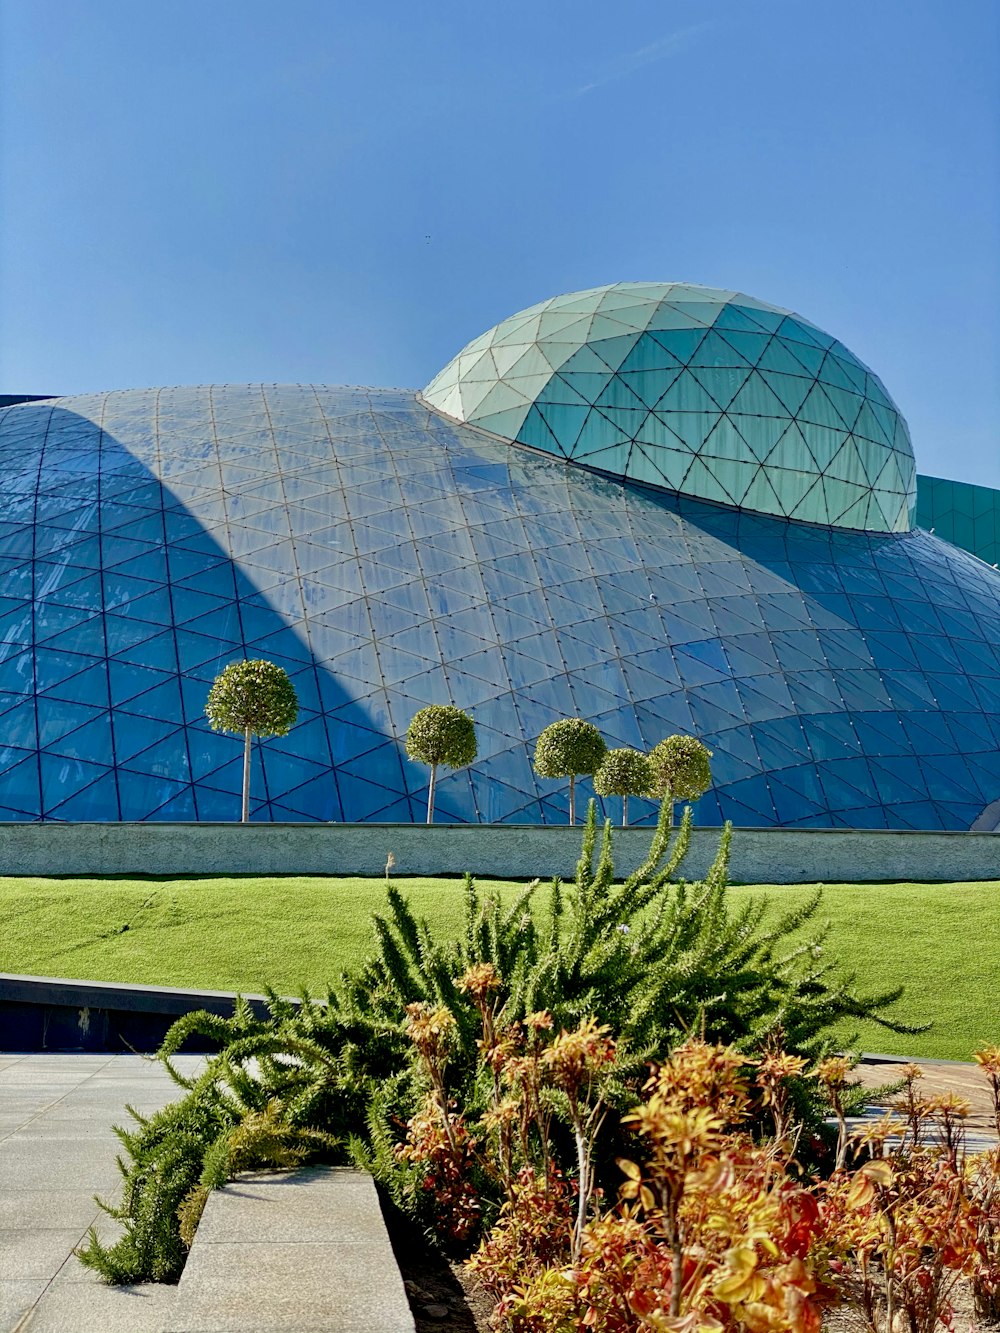 blue glass dome building near green grass field during daytime